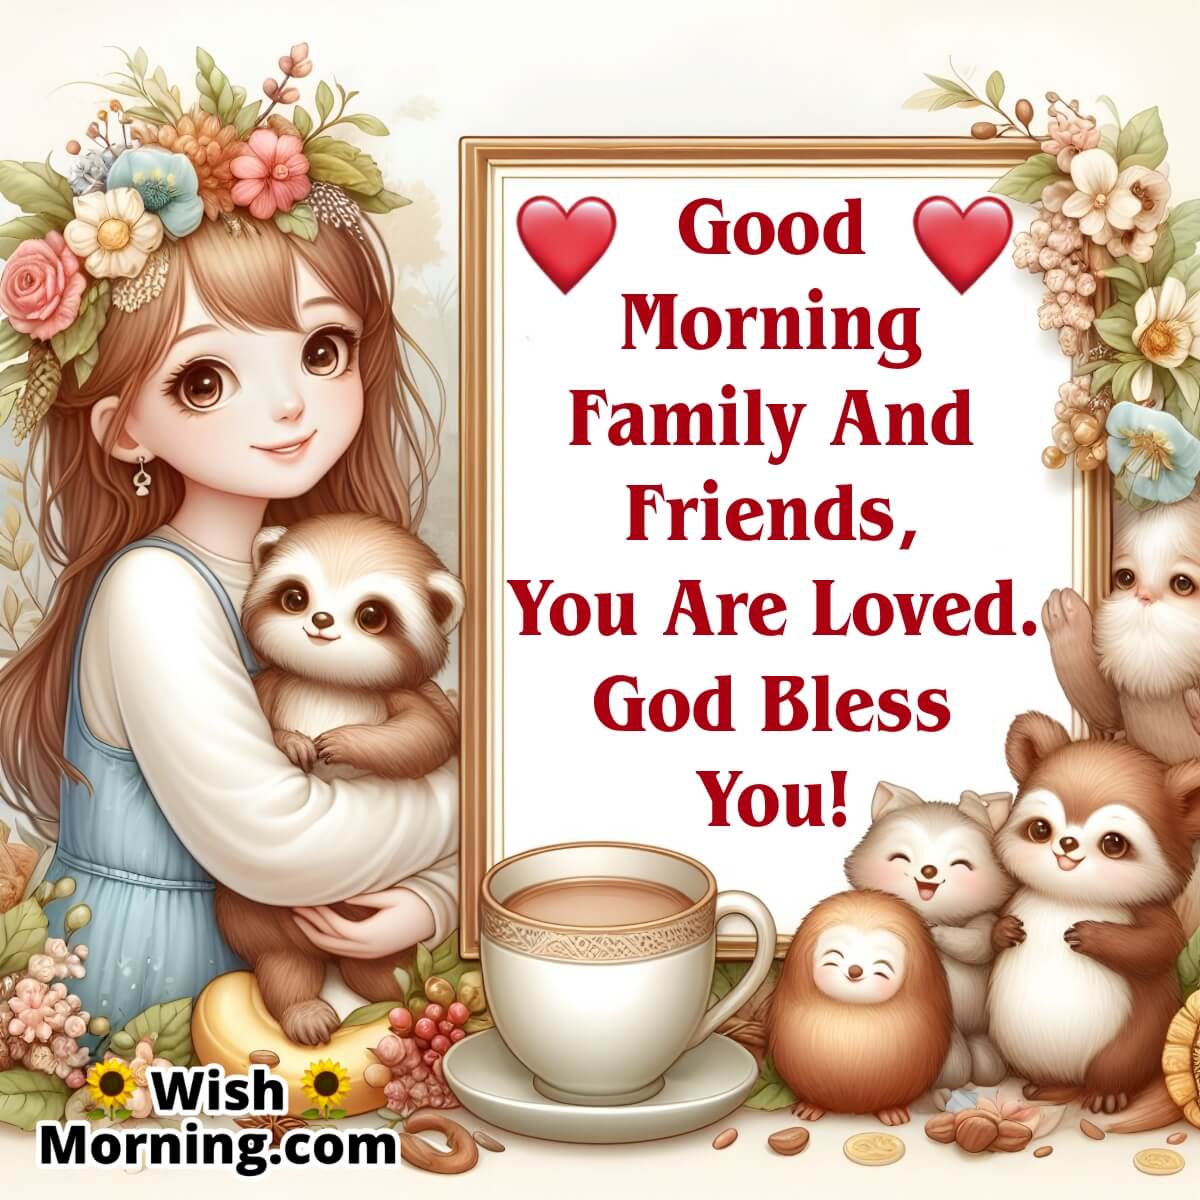 Good Morning Family And Friends, God Bless You